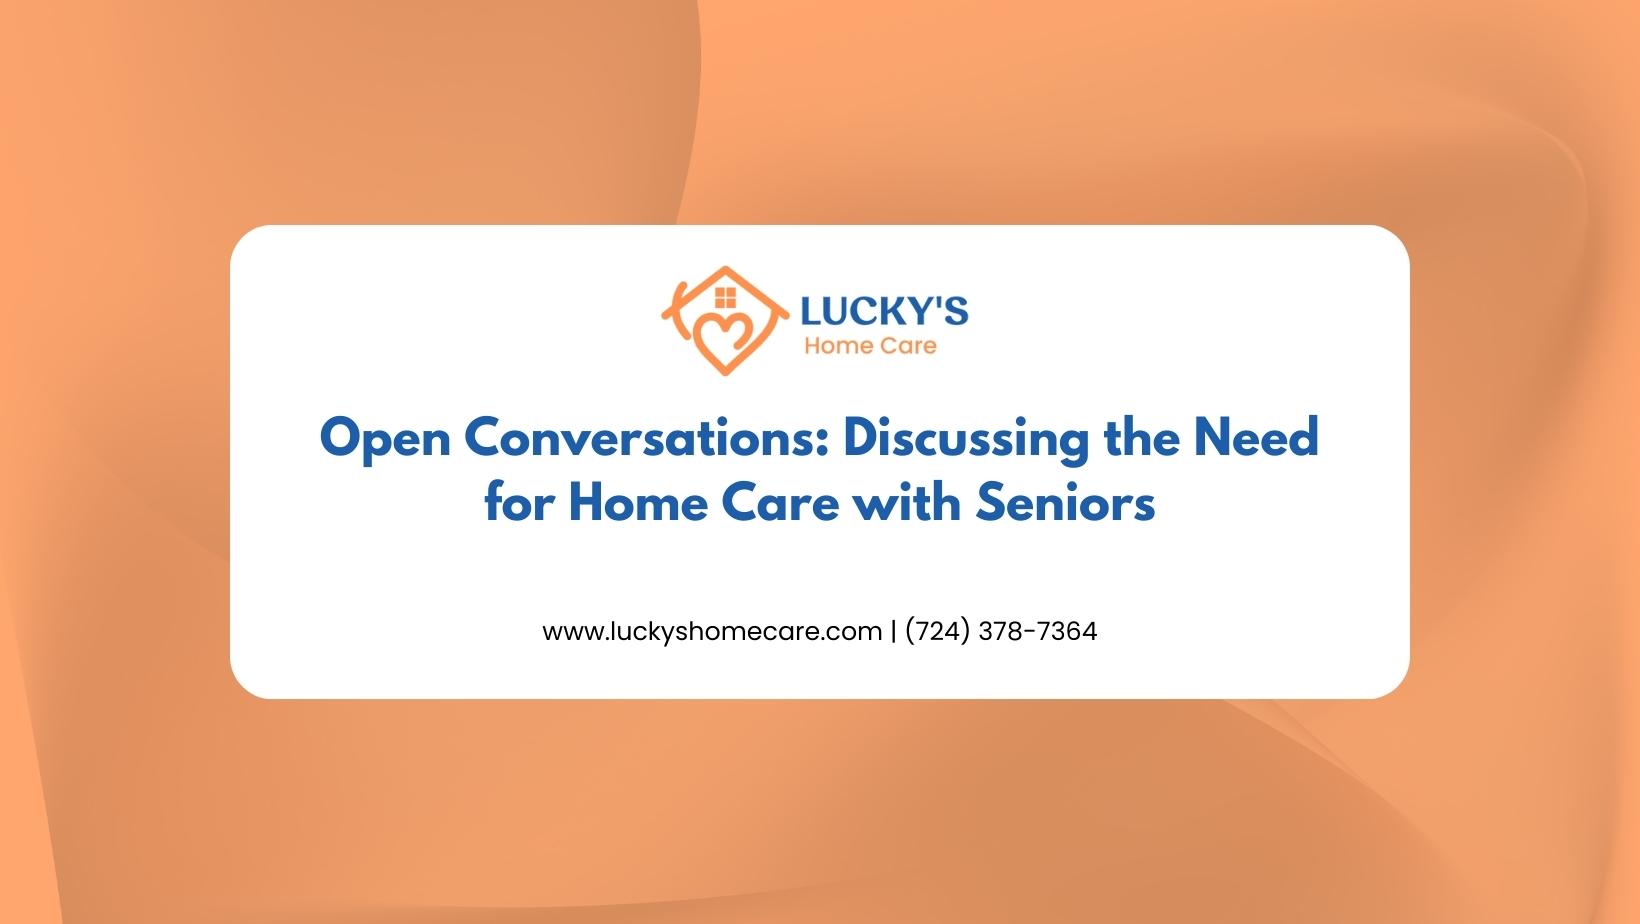 Open Conversations- Discussing the Need for Home Care with Seniors